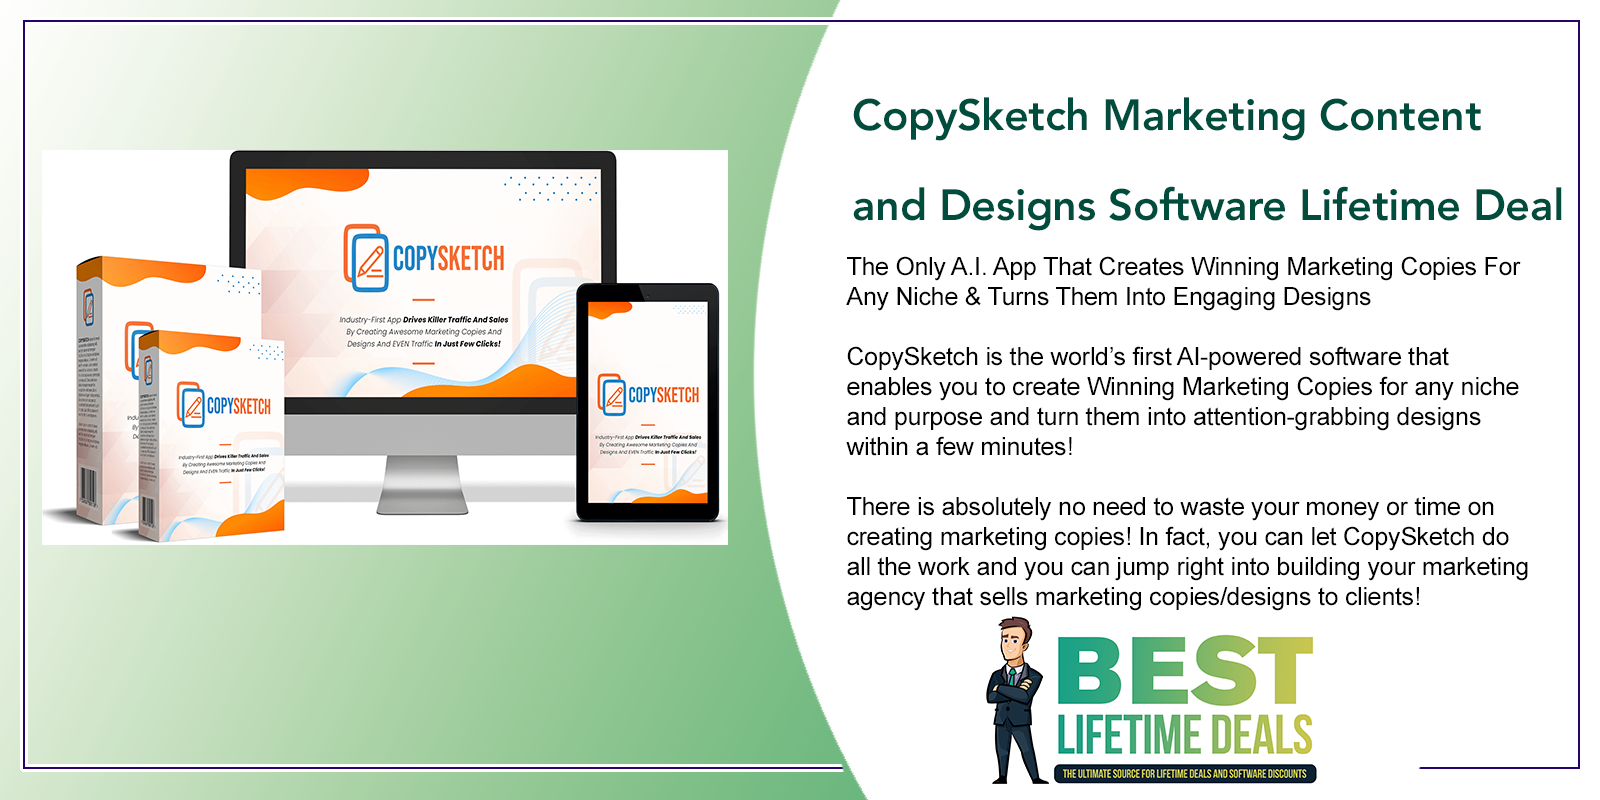 CopySketch Marketing Content and Designs Software Lifetime Deal Featured Image